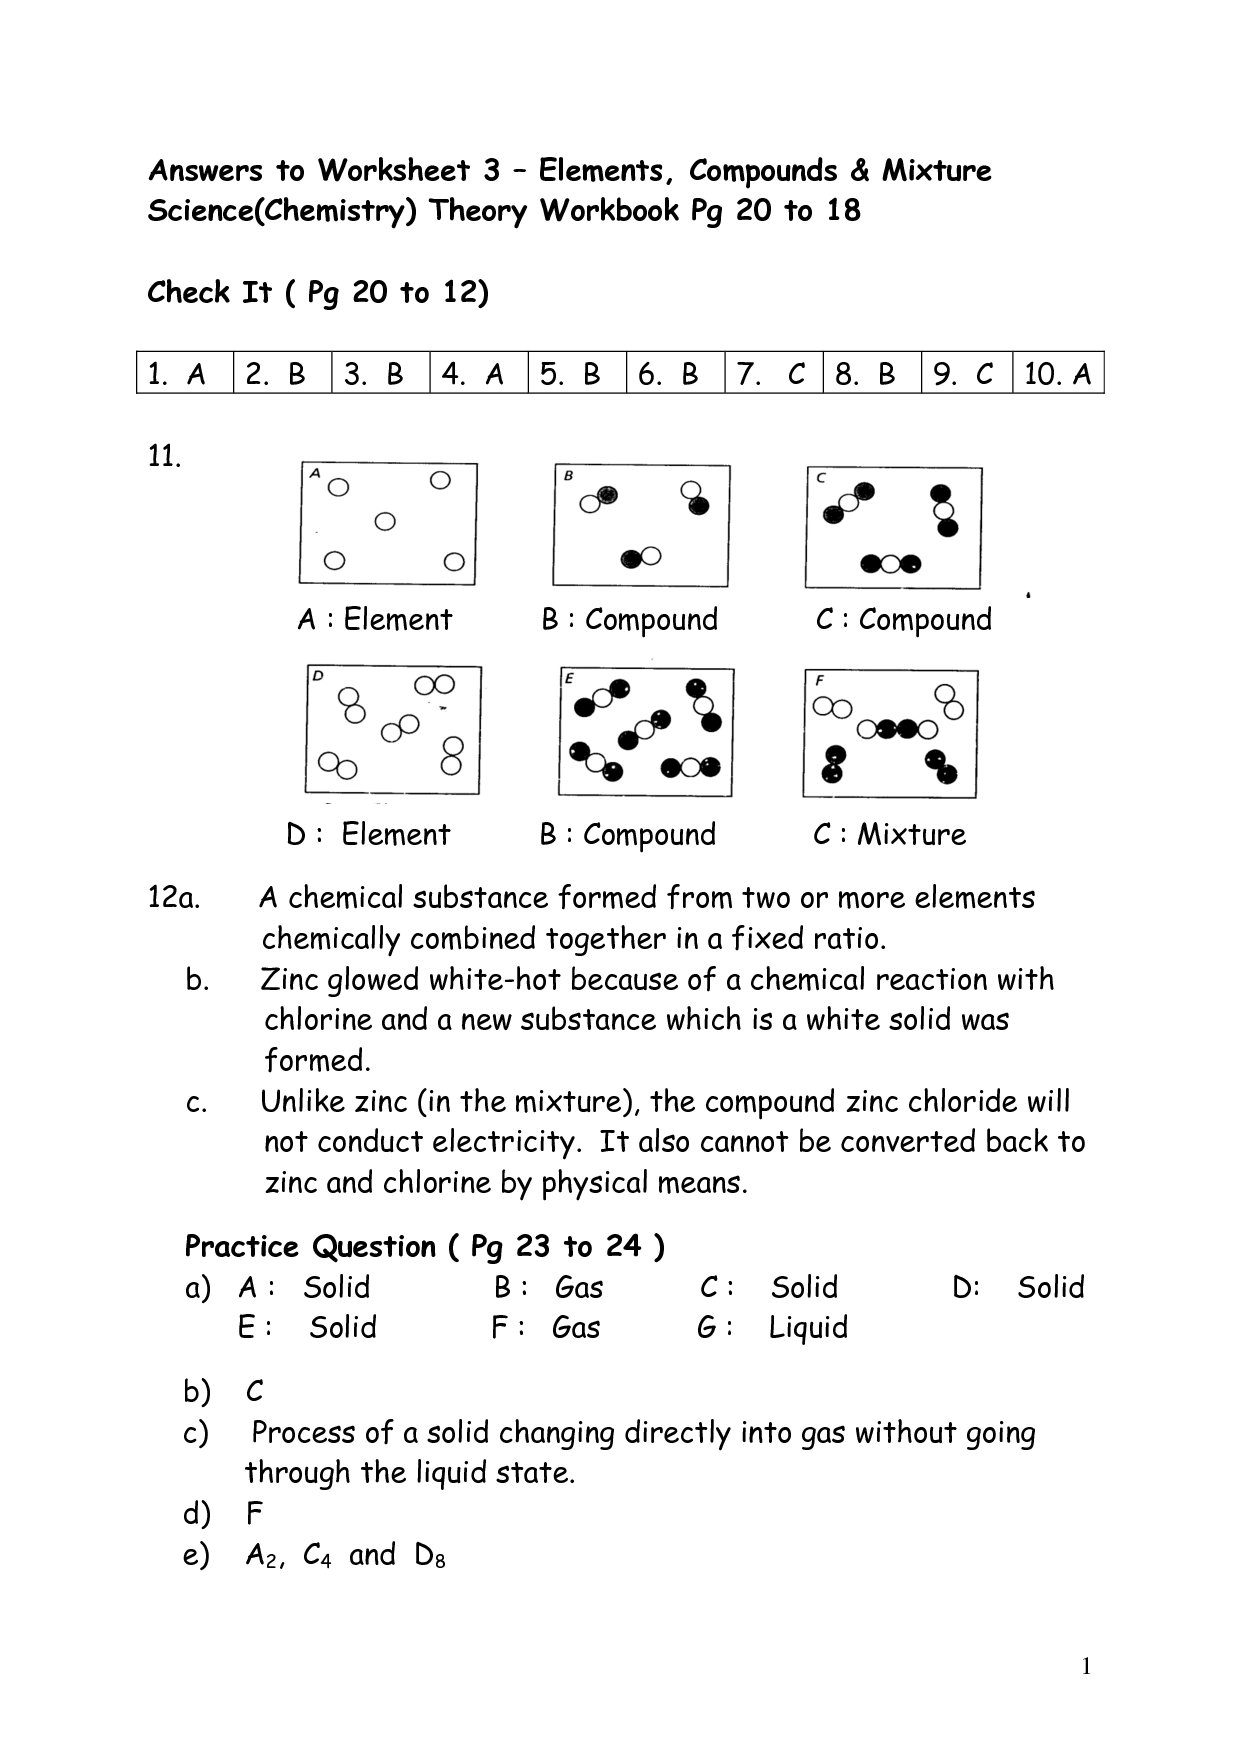 Elements And Their Properties Worksheet Answers  Yooob Inside Elements Compounds And Mixtures Worksheet